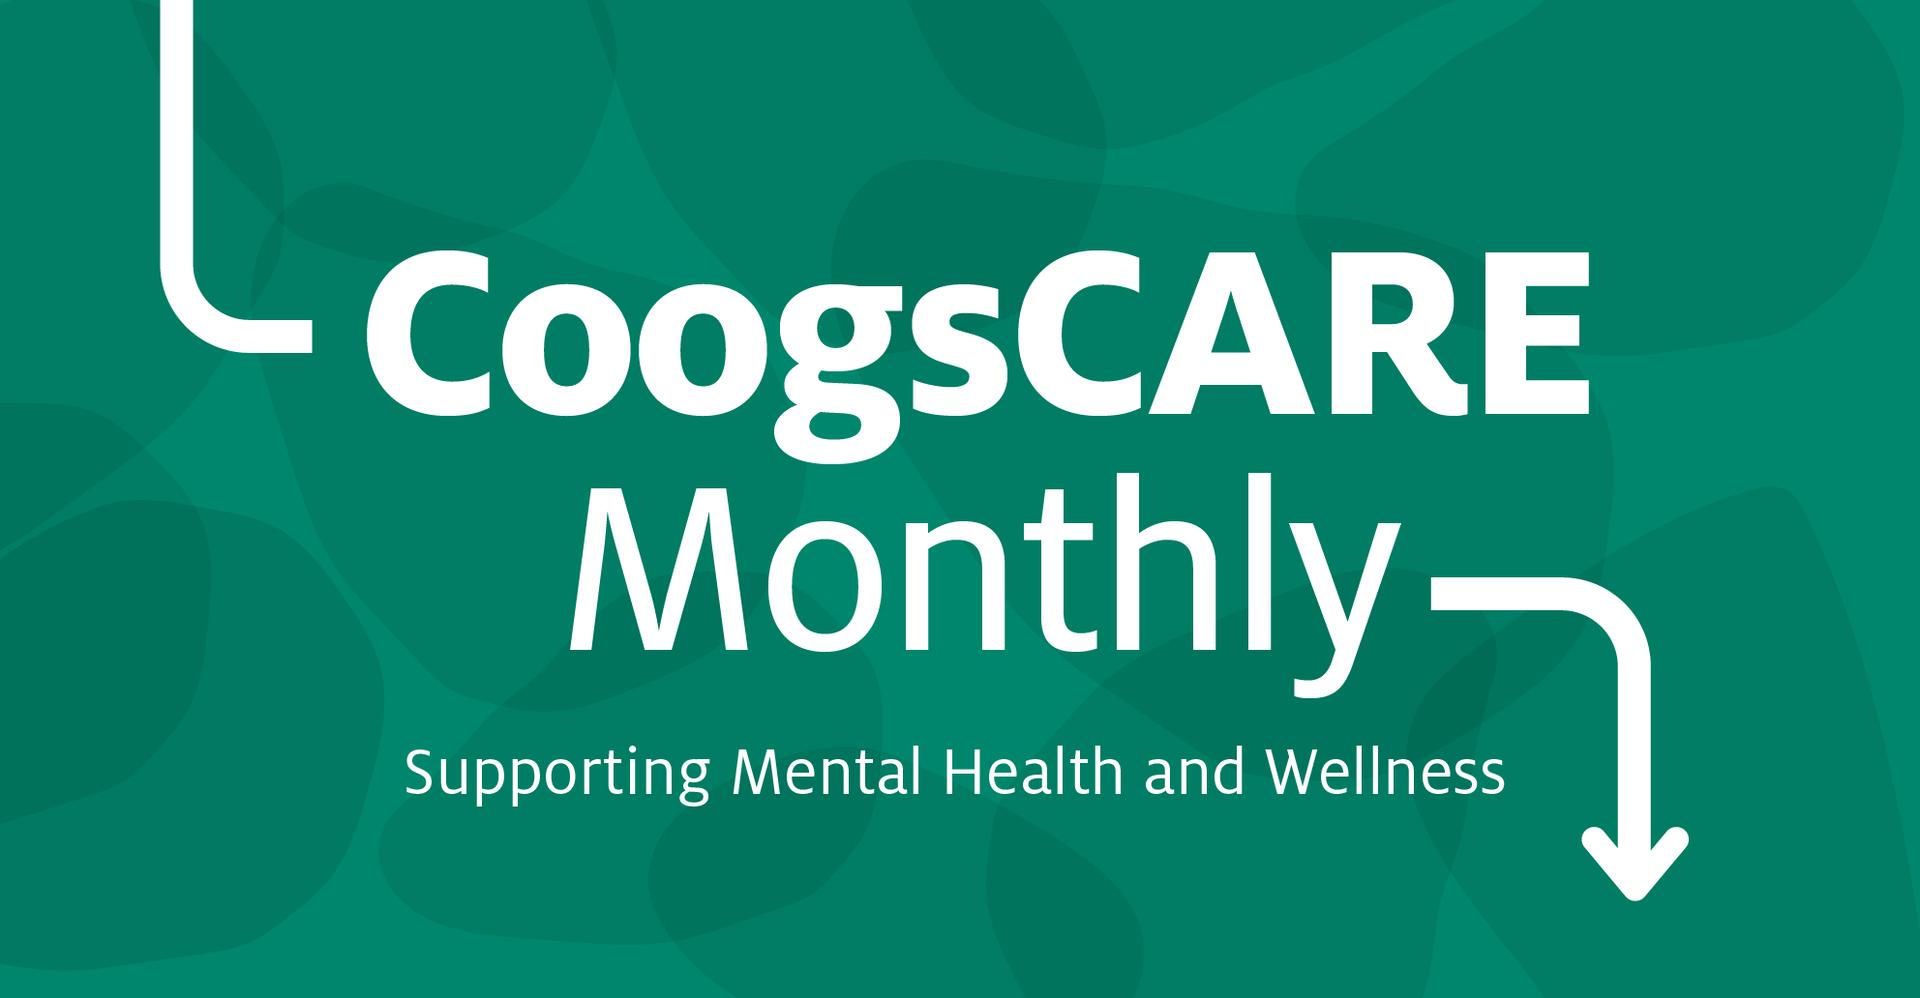 CoogsCARE Monthly green banner with the name of the publication and the text Supporting Mental Health and Wellness written in white